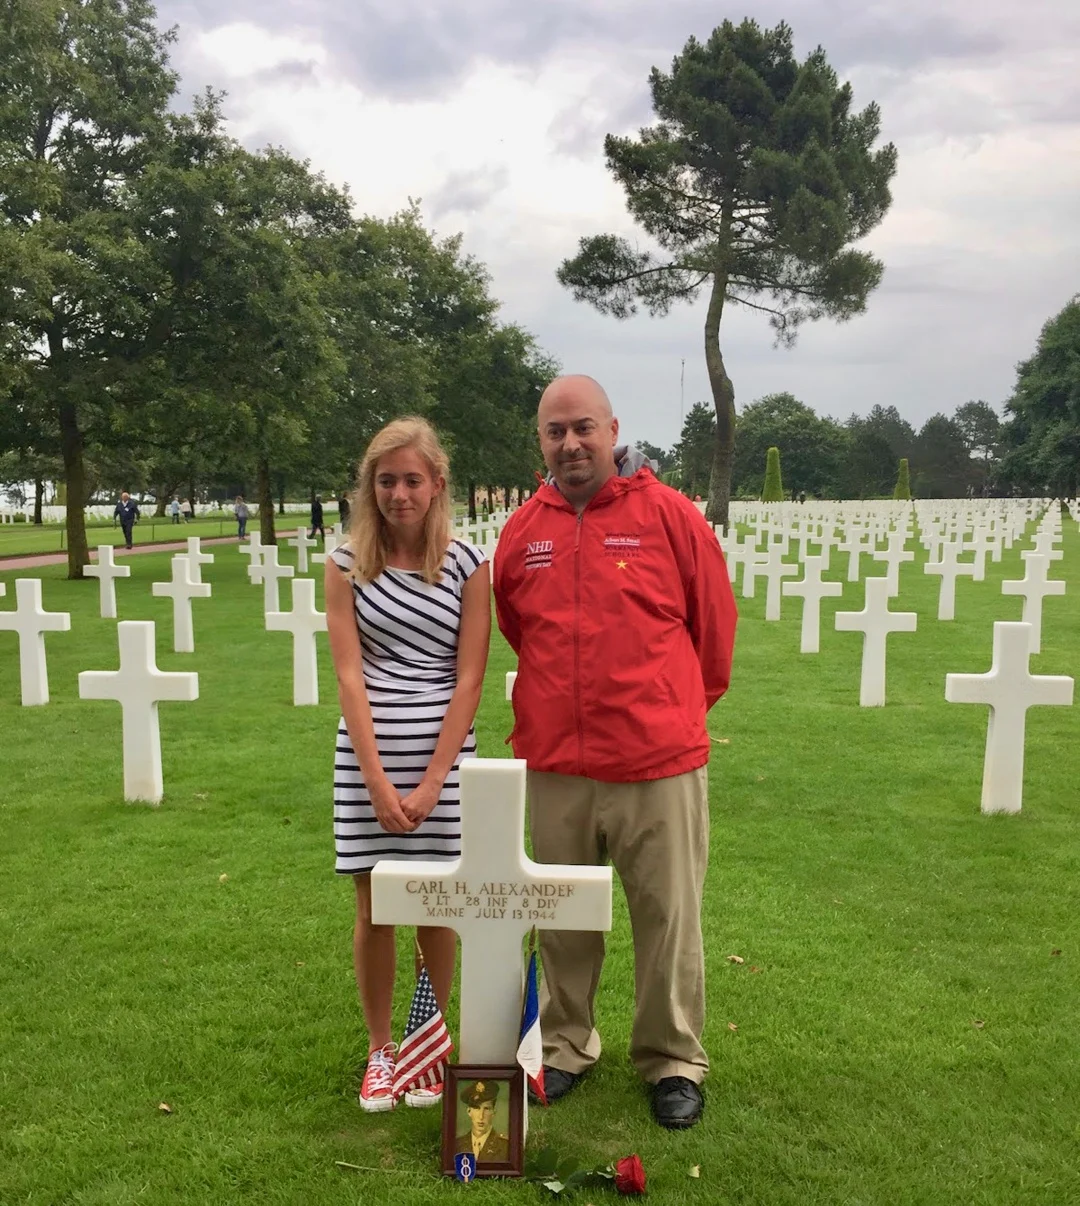 Teacher travel grants for History and Social Studies educators: 6 funded global education programs! With a student near the grave of 2nd Lt. Carl H. Alexander of Maine at the Normandy American Cemetery in France.